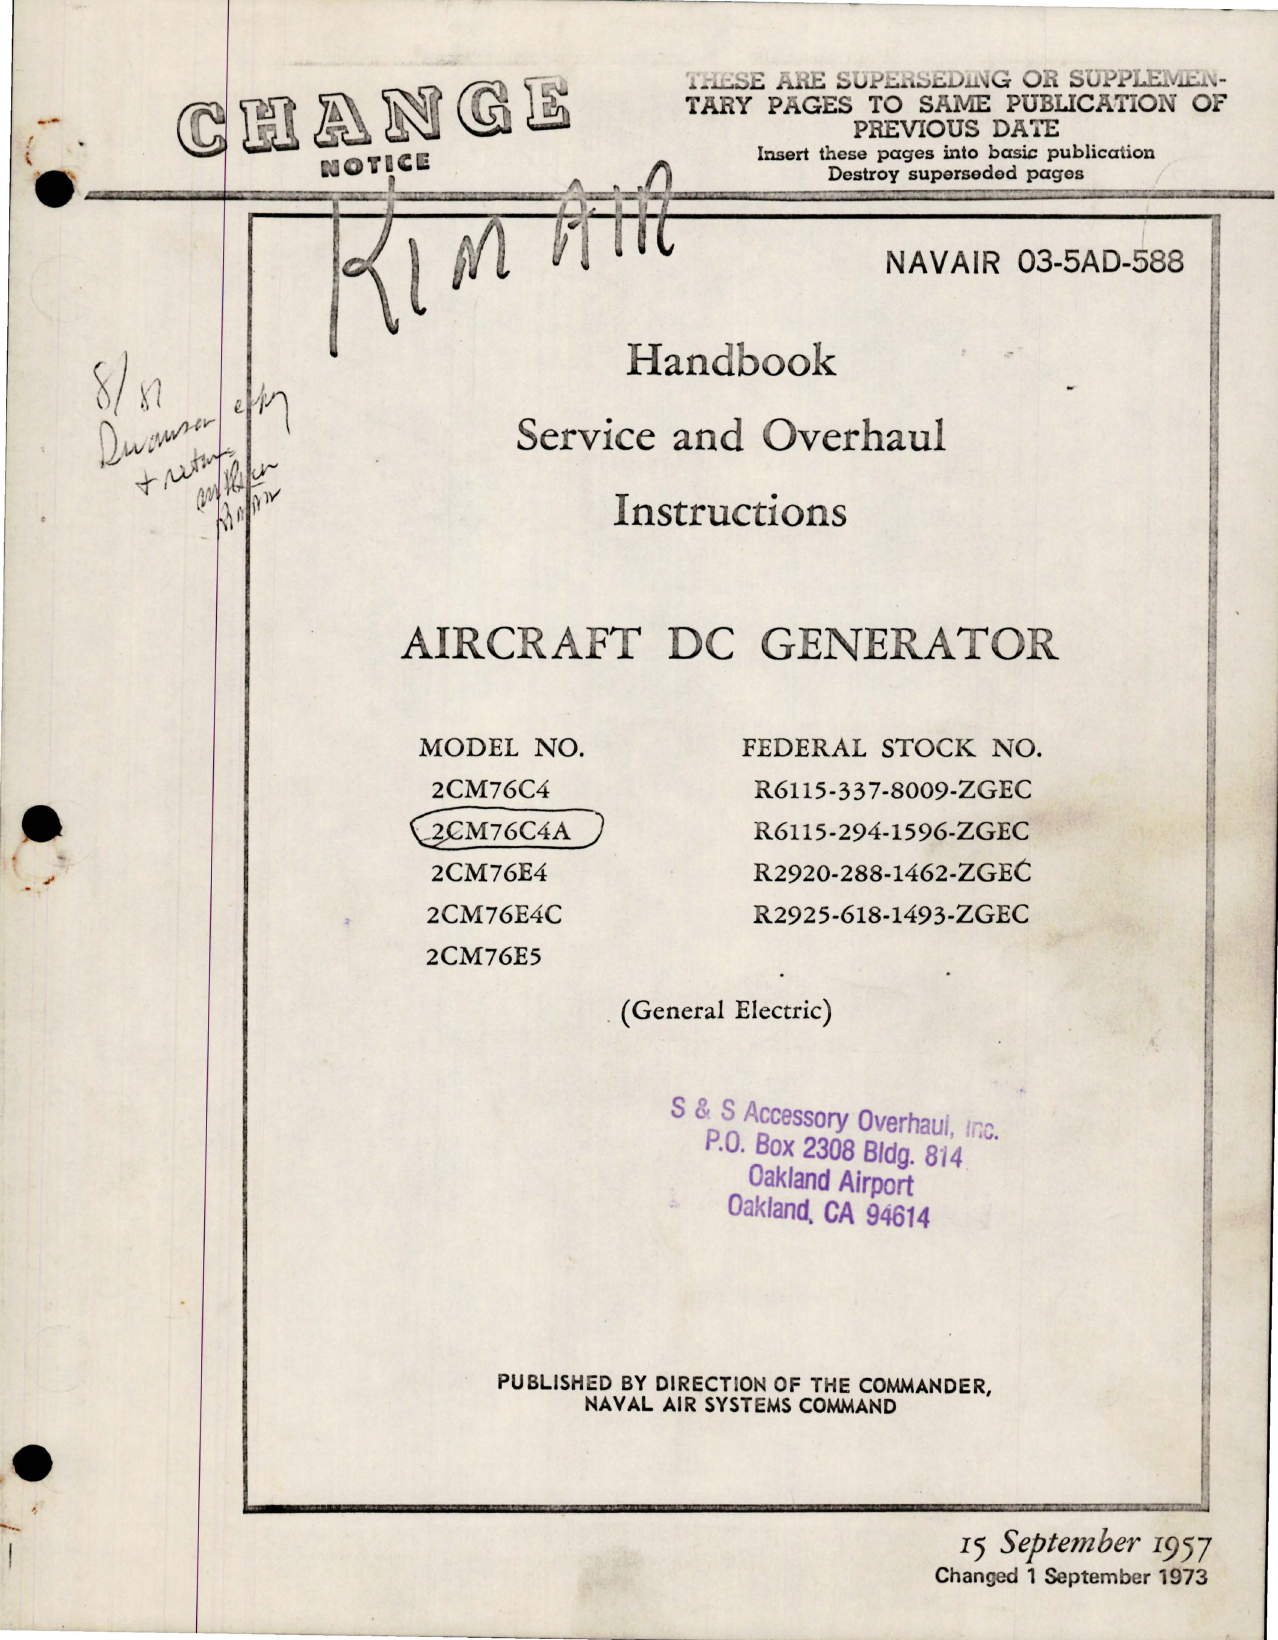 Sample page 1 from AirCorps Library document: Service and Overhaul Instructions for DC Generator - Models: 2CM76C4, 2CM76C4A, 2CM76E4, 2CM76E4C, and 2CM76E5